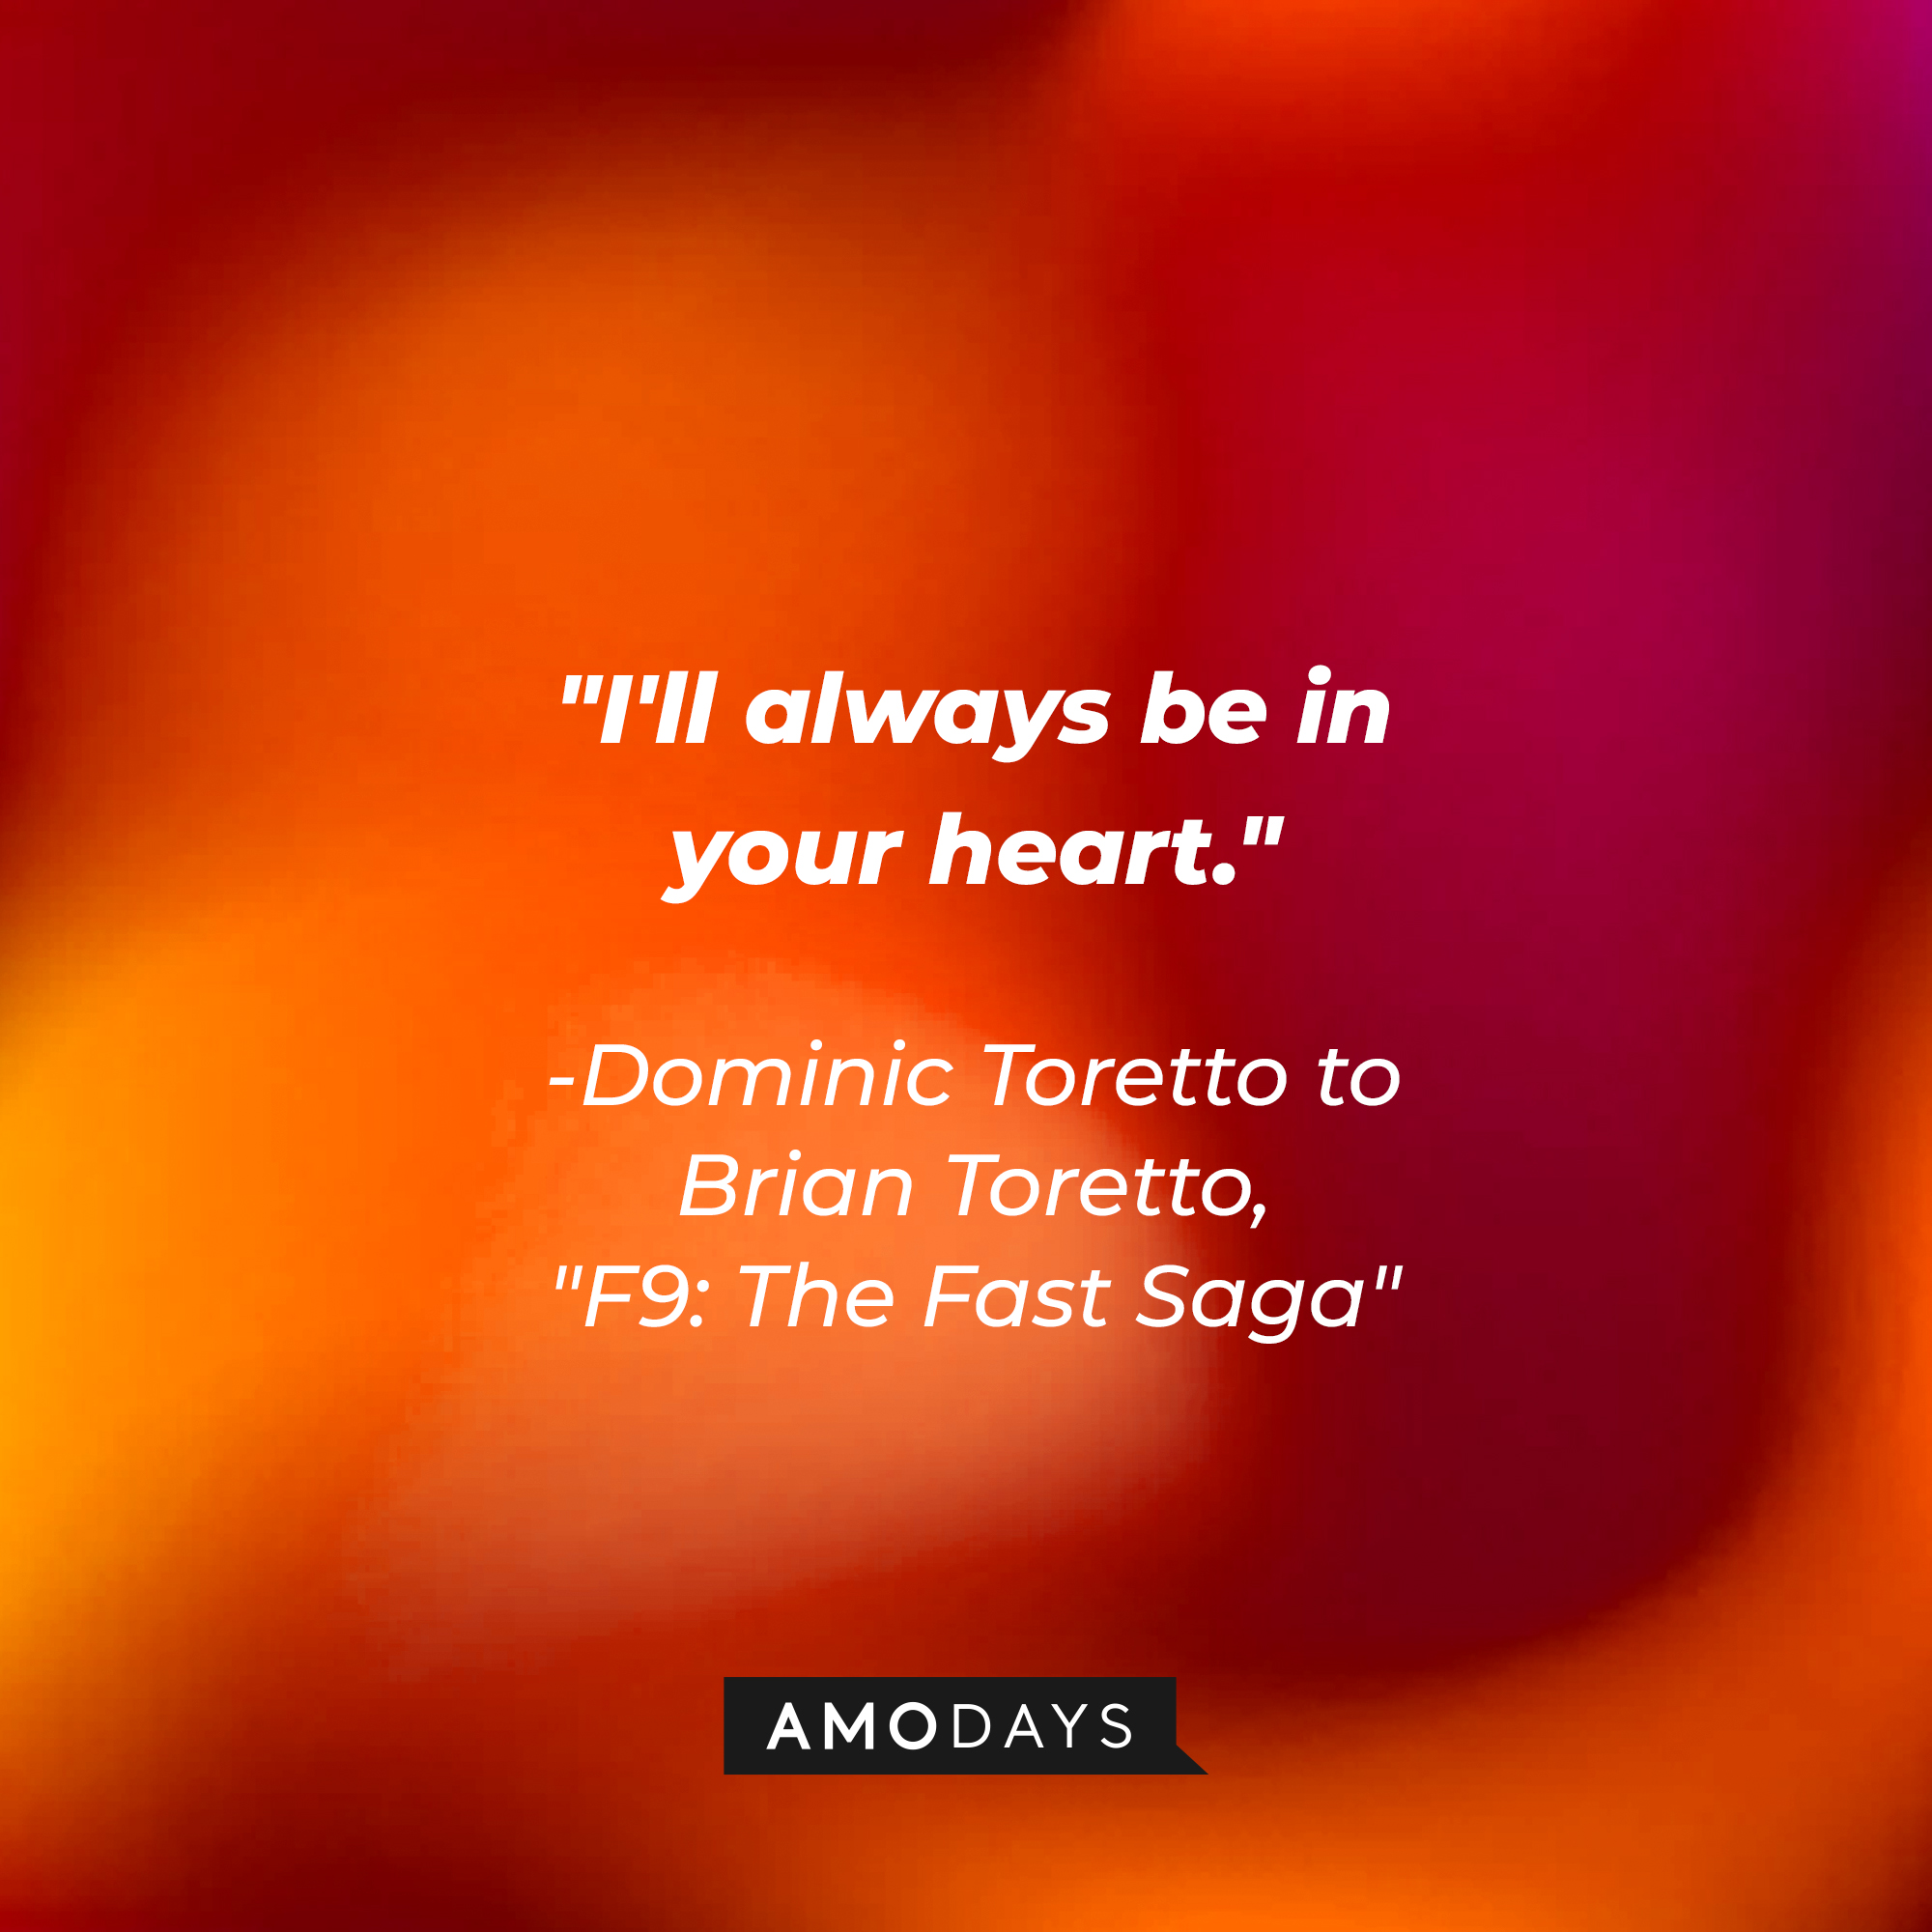 Dominic Toretto’s quote: "I'll always be in your heart." | Image: AmoDays